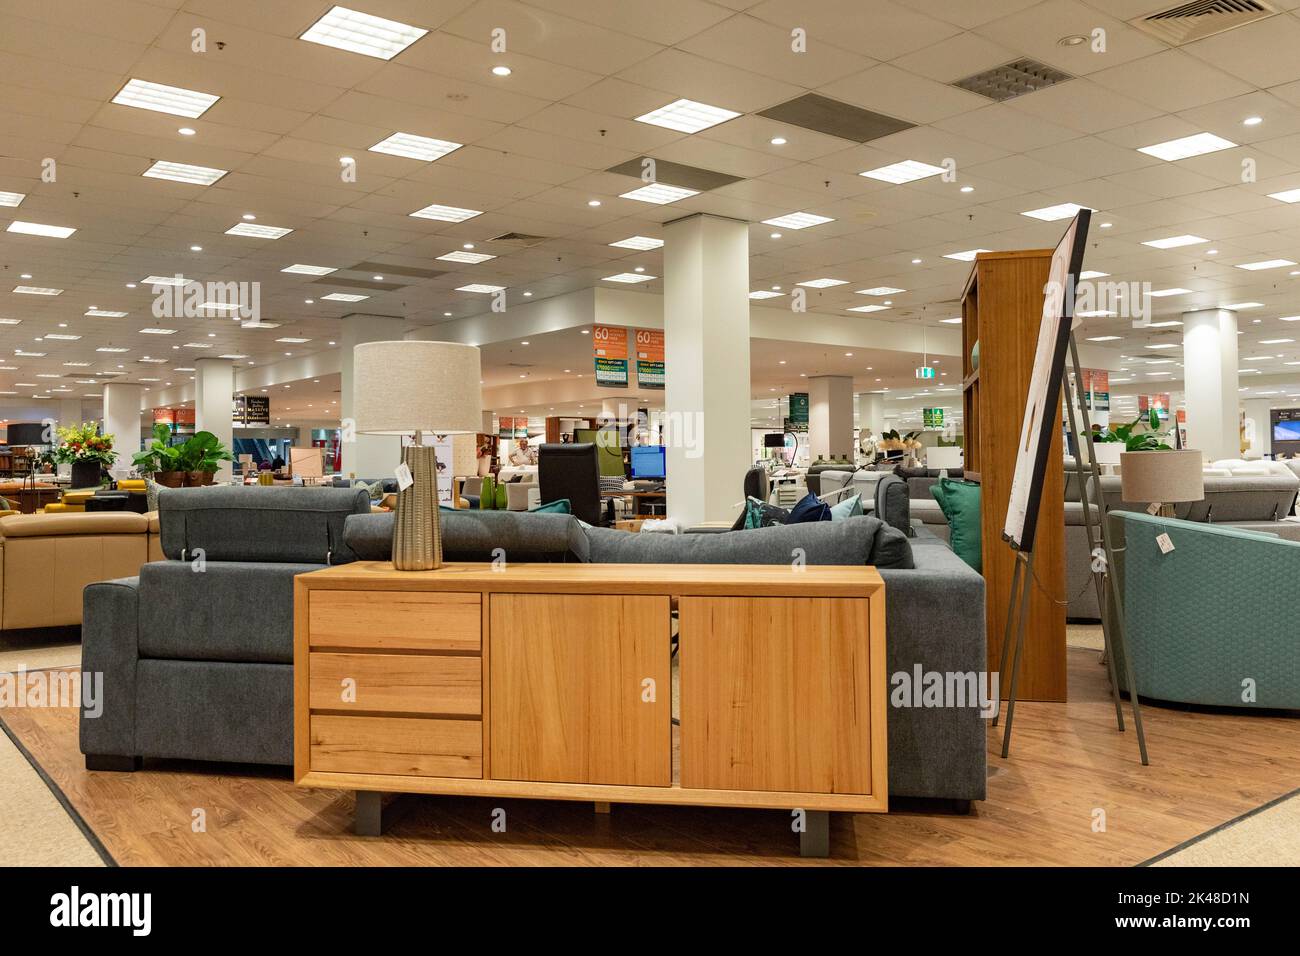 Domanye Harvey Norman furniture and household goods store in Sydney selling furniture, technology and white goods,Australia Stock Photo